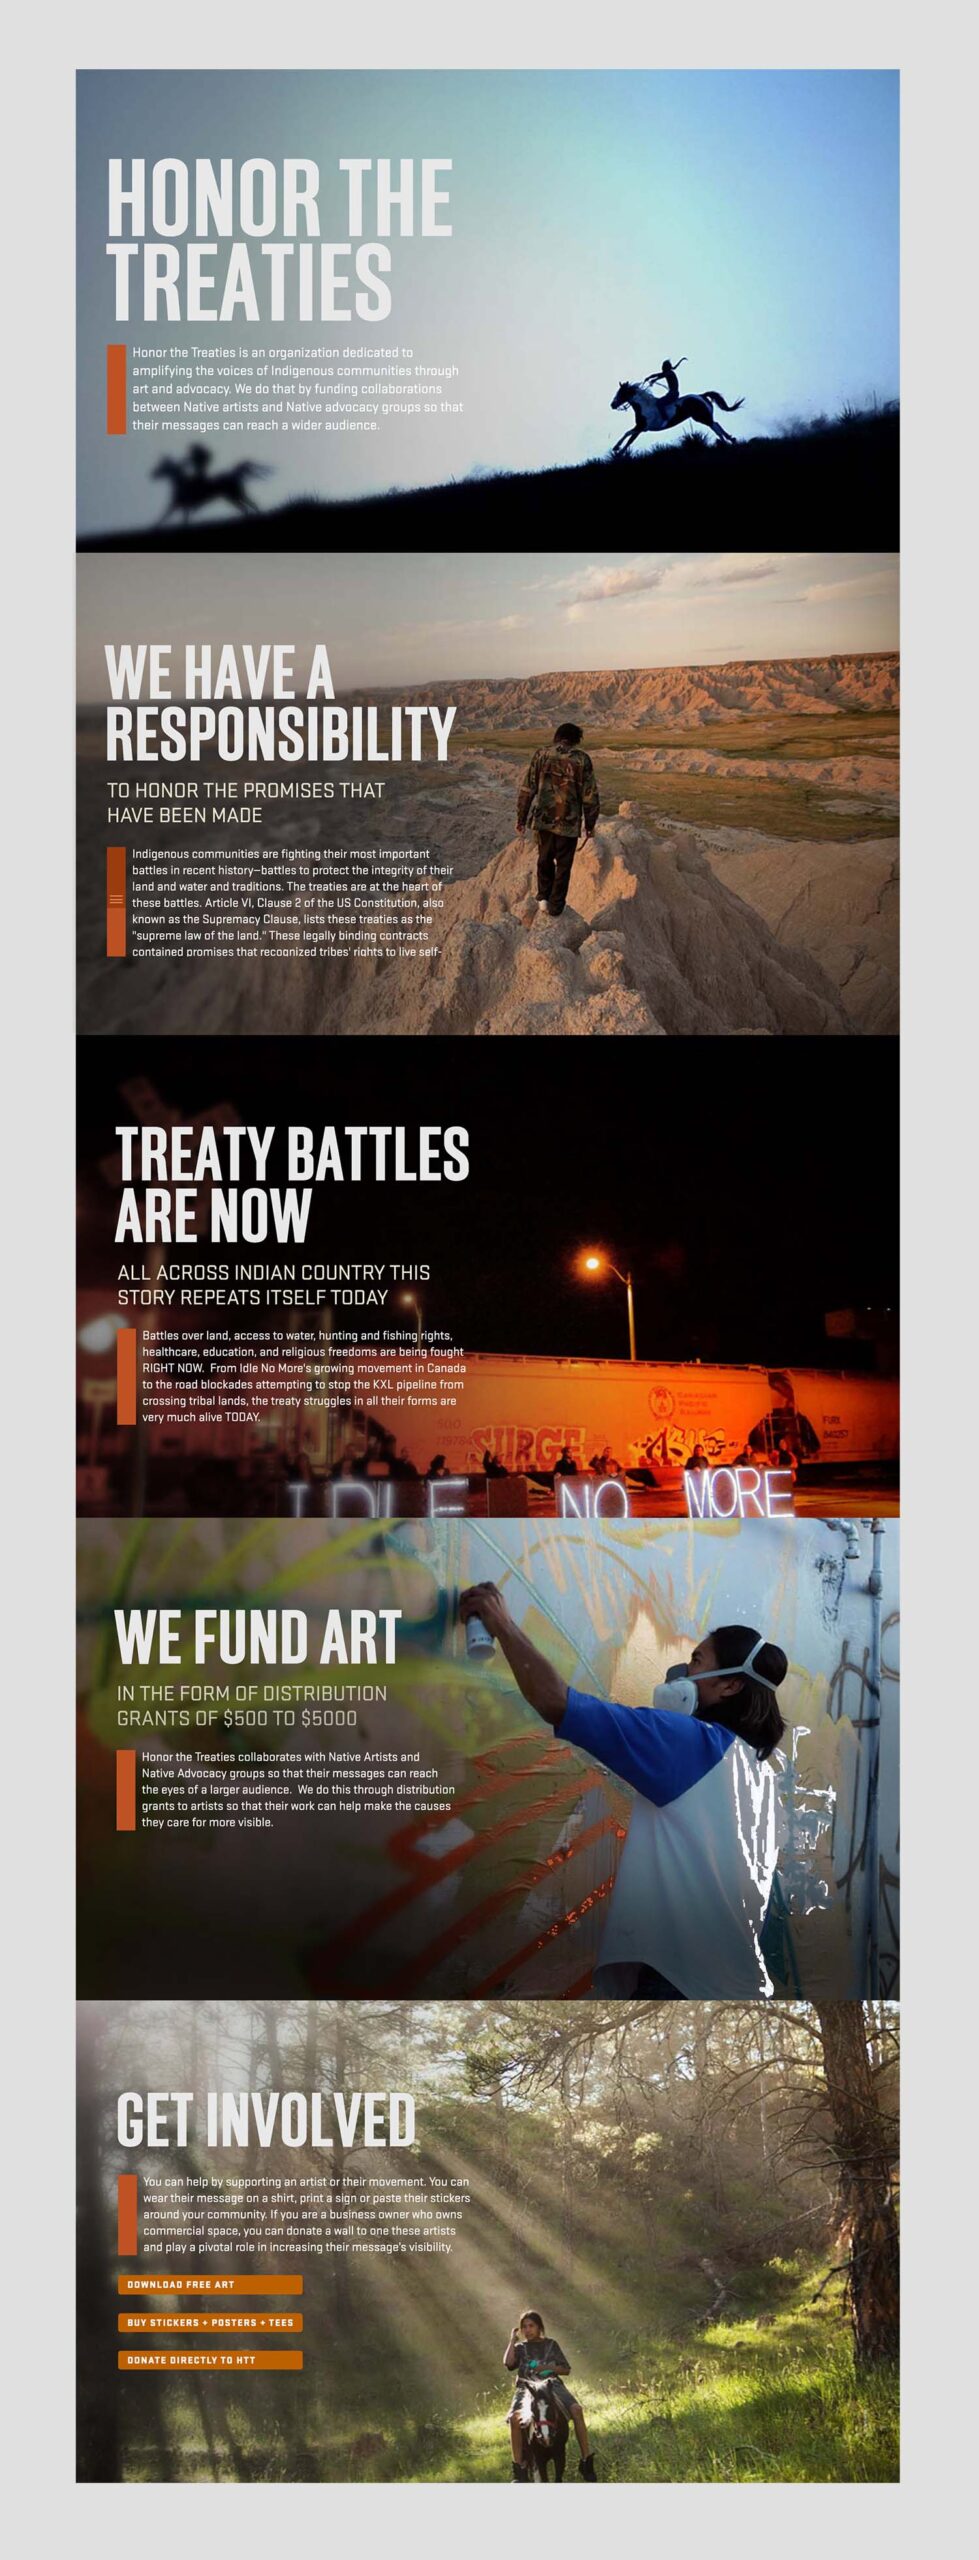 ip honor the treaties website intro pages design by Design Direction llc scaled